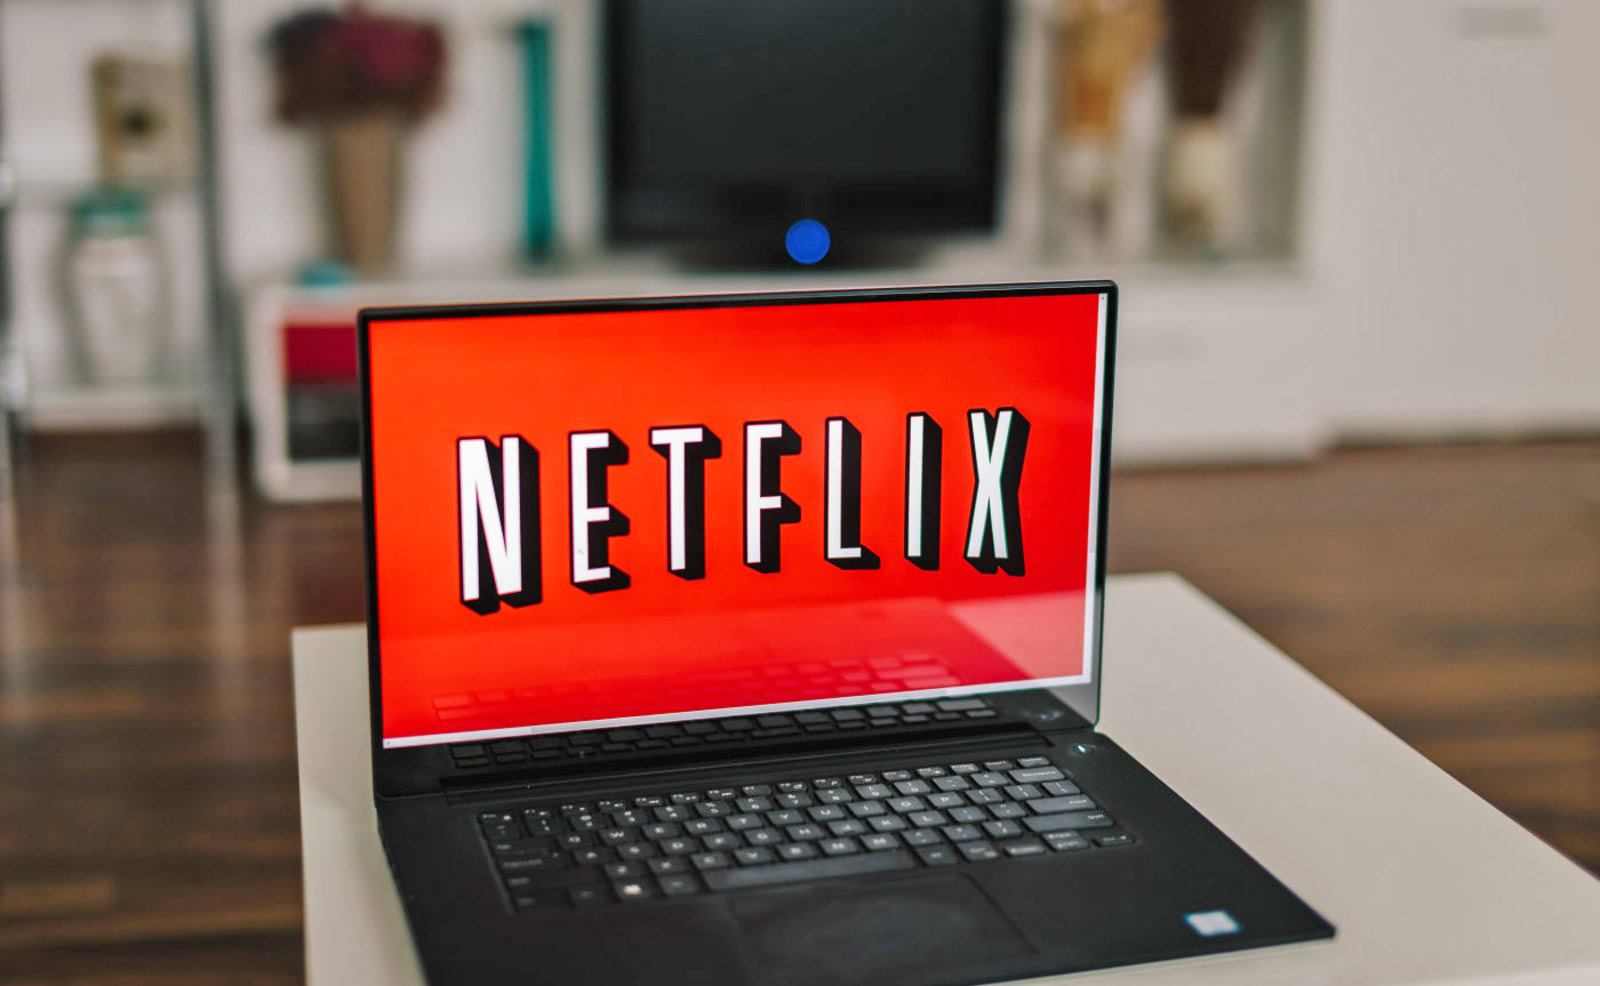 Netflix will spend over $400 million on Canadian content